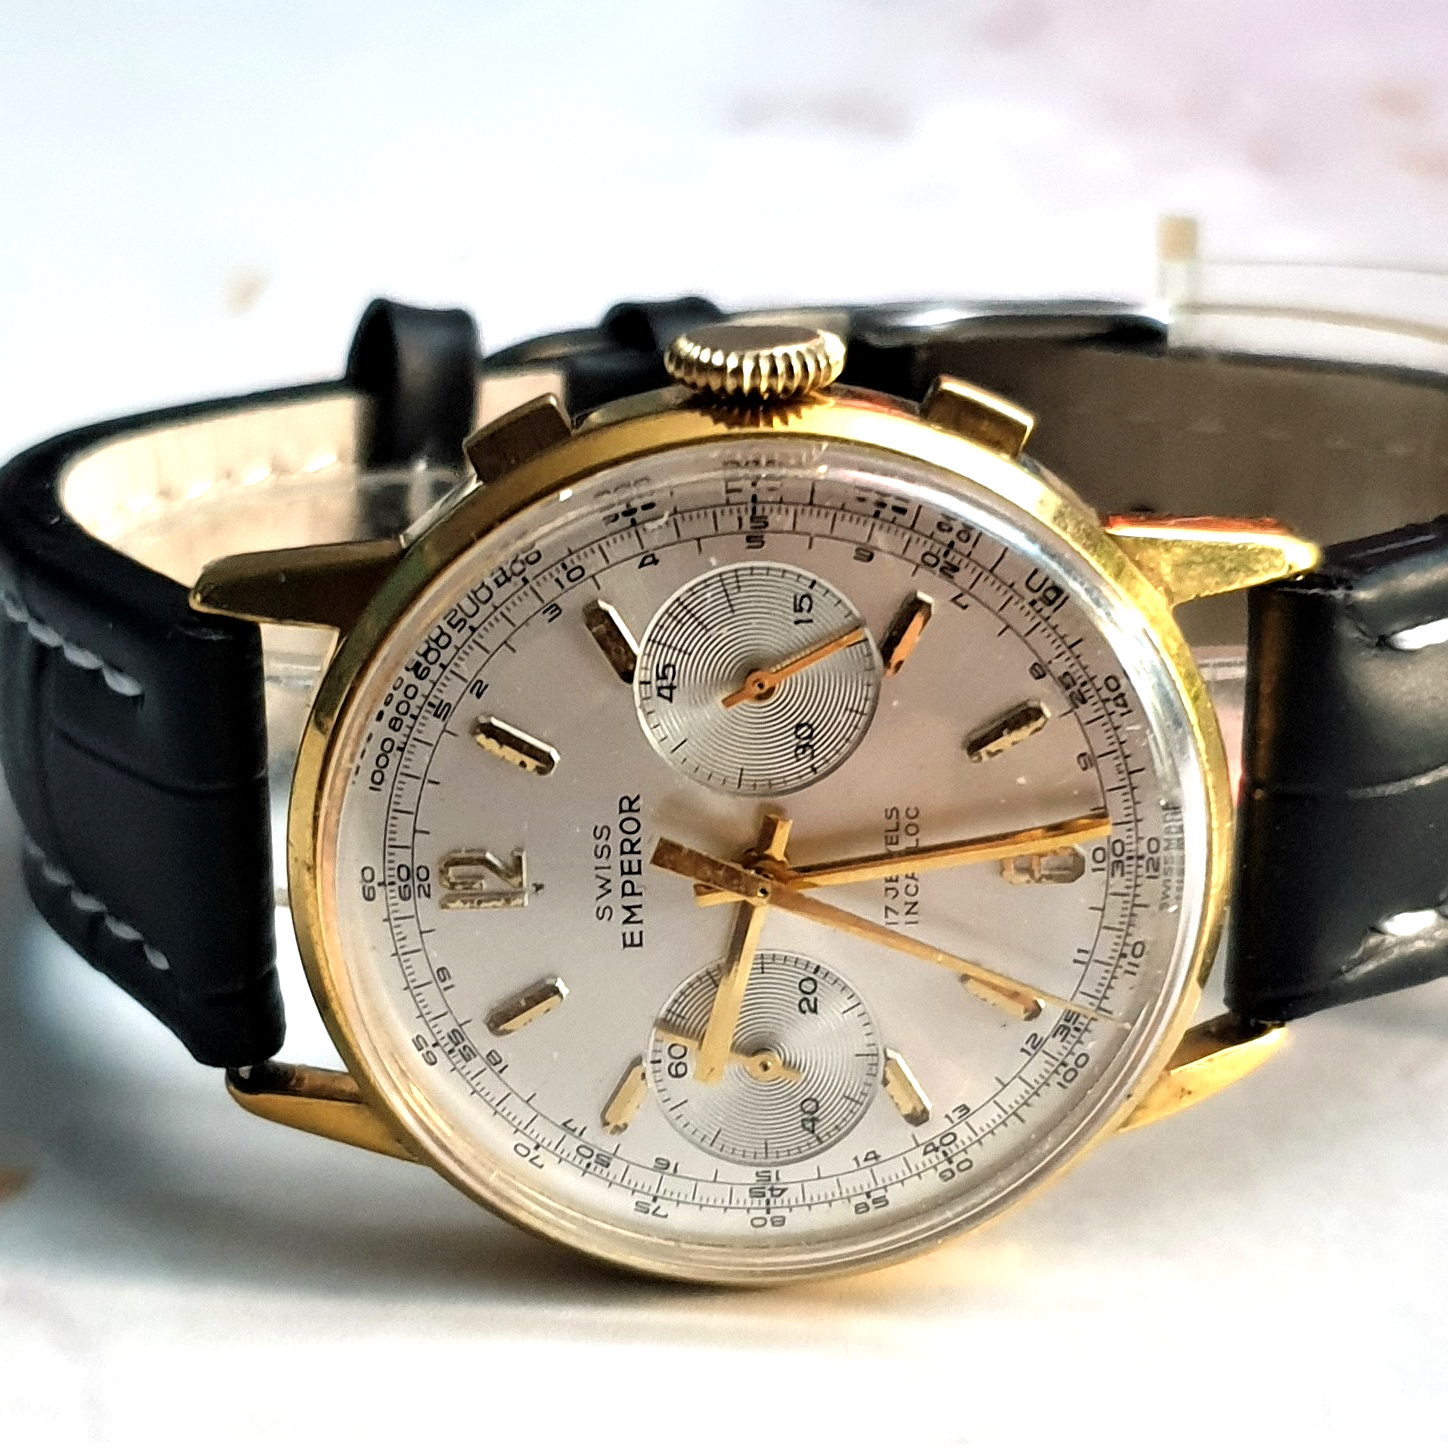 SWISS EMPEROR LARGE CHRONOGRAPH WITH ORIGINAL DIAL IN GOLD PLATED CASE VALJOUX CAL 7733 CIRCA 1960S. - Image 4 of 11